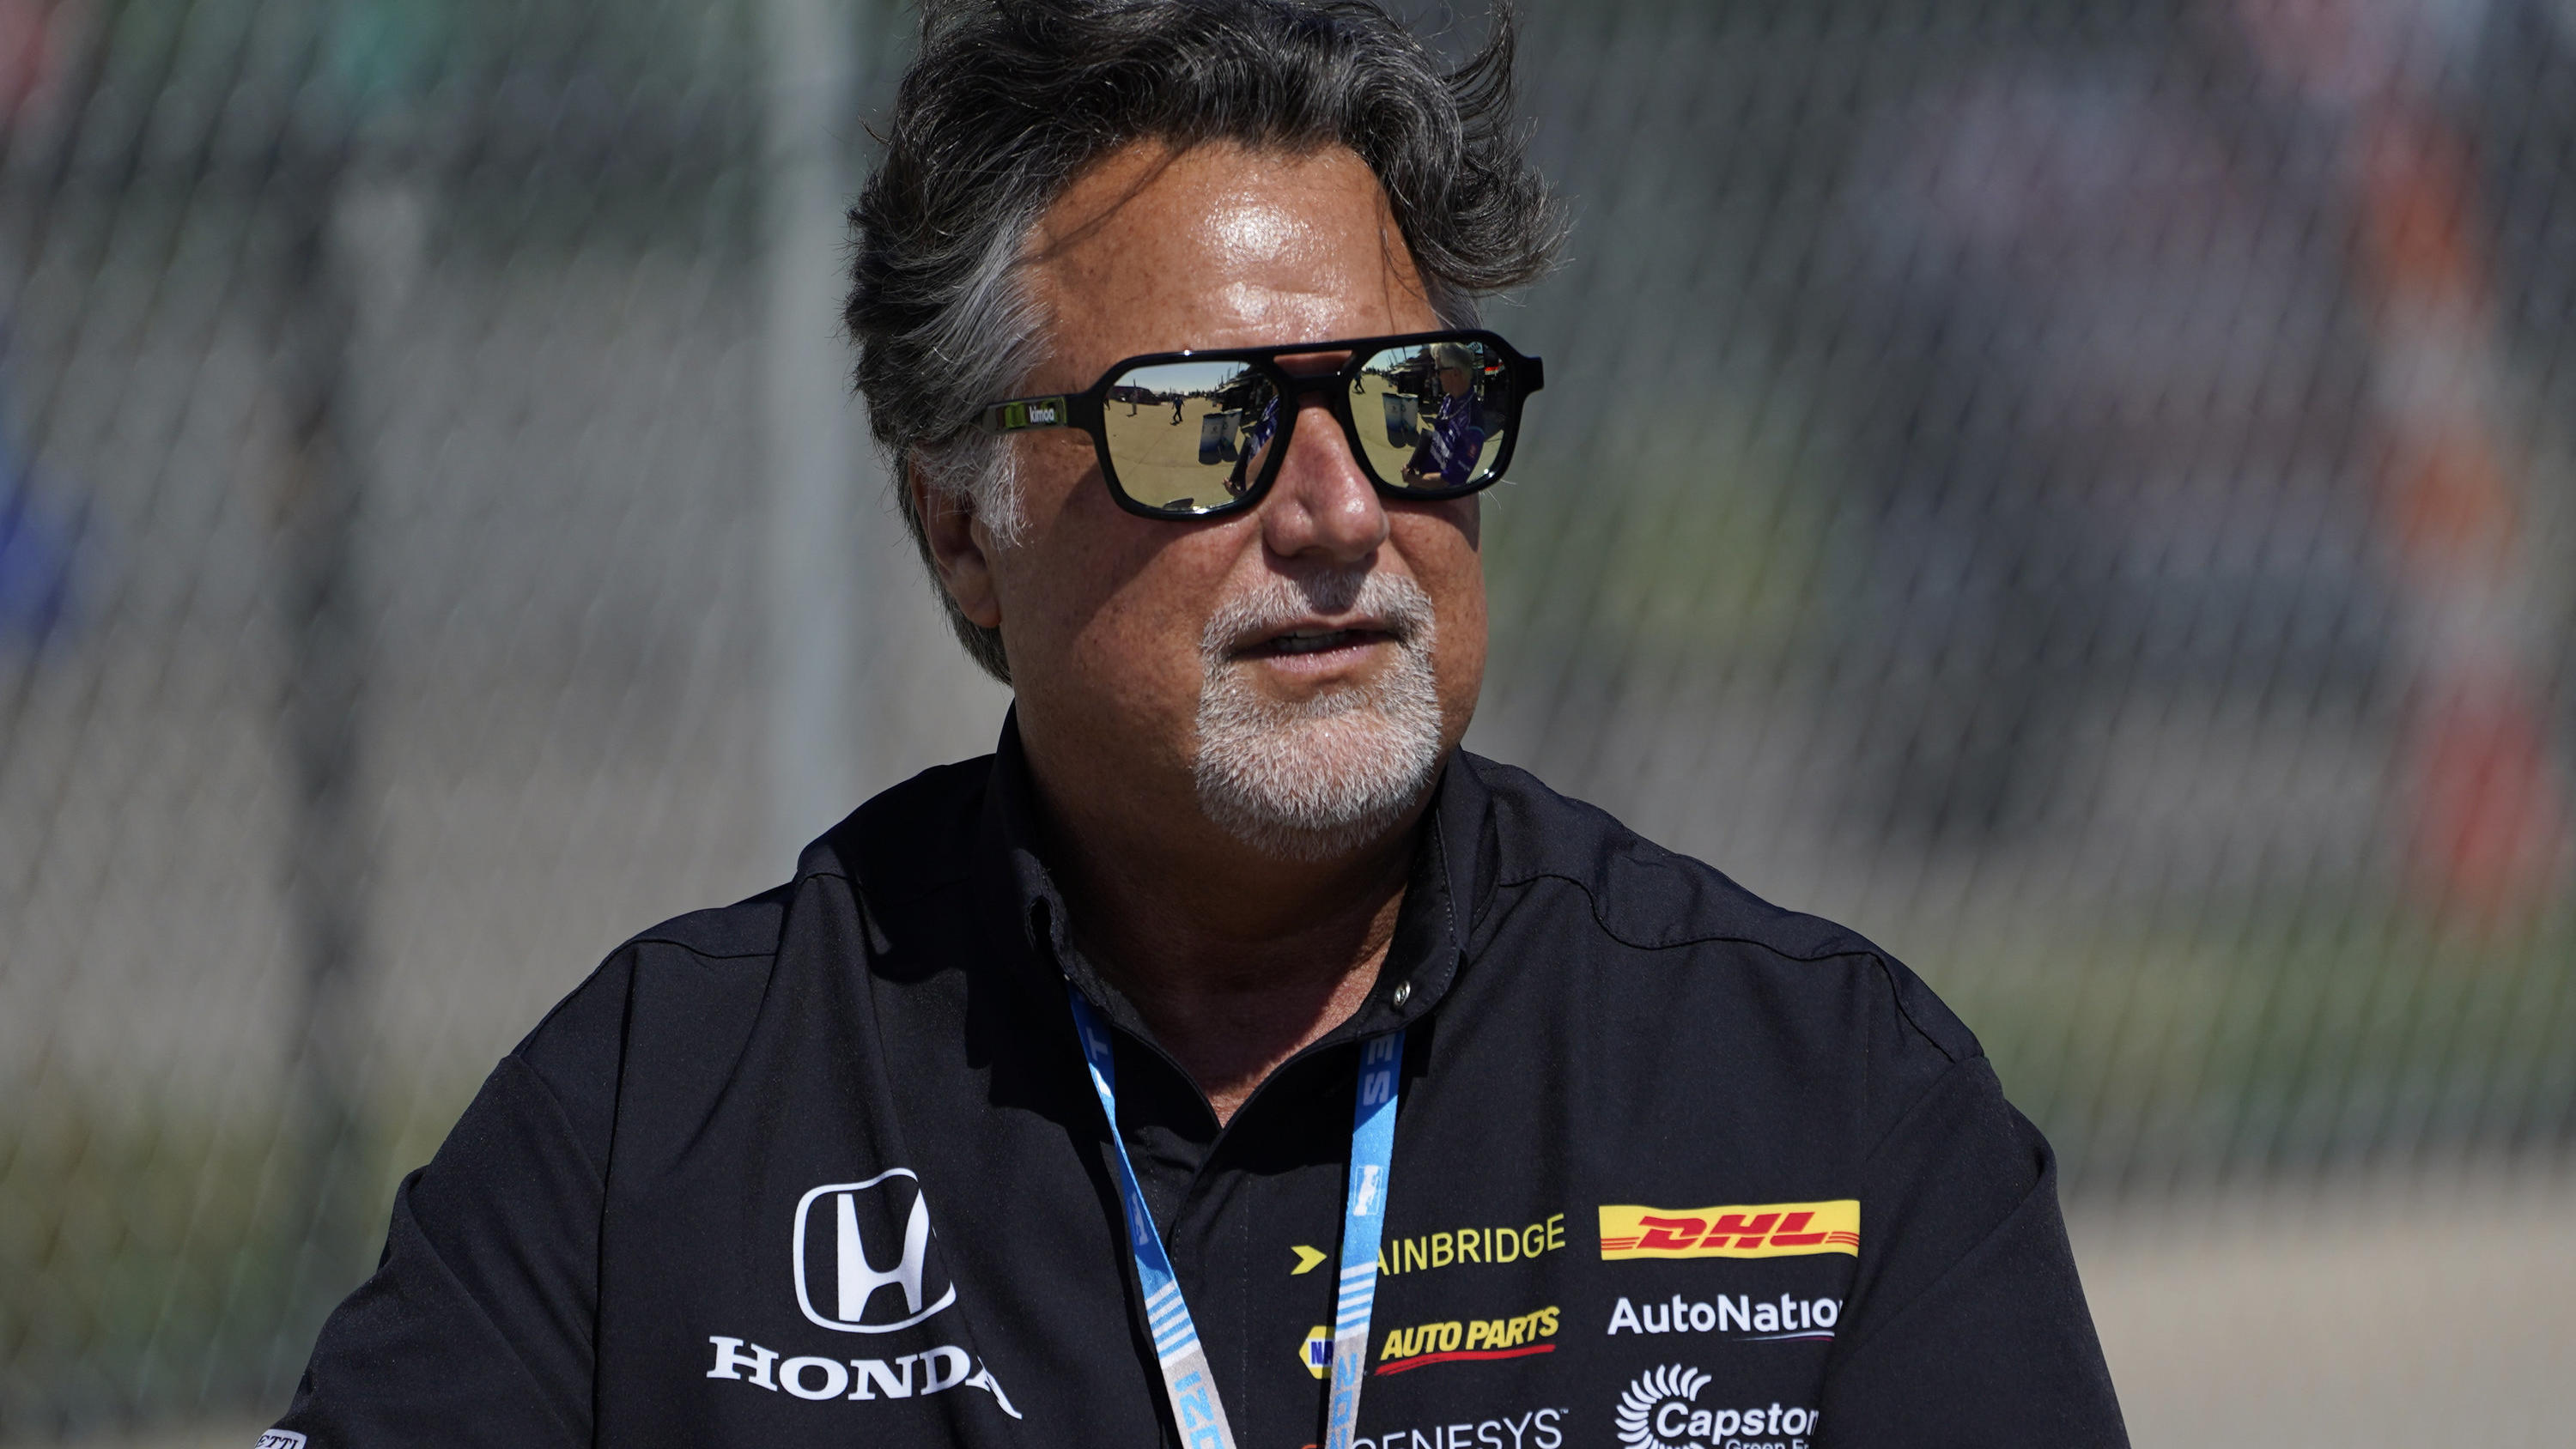 FILE - Team owner Michael Andretti looks on during practice for the IndyCar Detroit Grand Prix auto racing doubleheader on Belle Isle in Detroit, on June 11, 2021. If things had gone according to plan, Colton Herta would be in Miami preparing for the